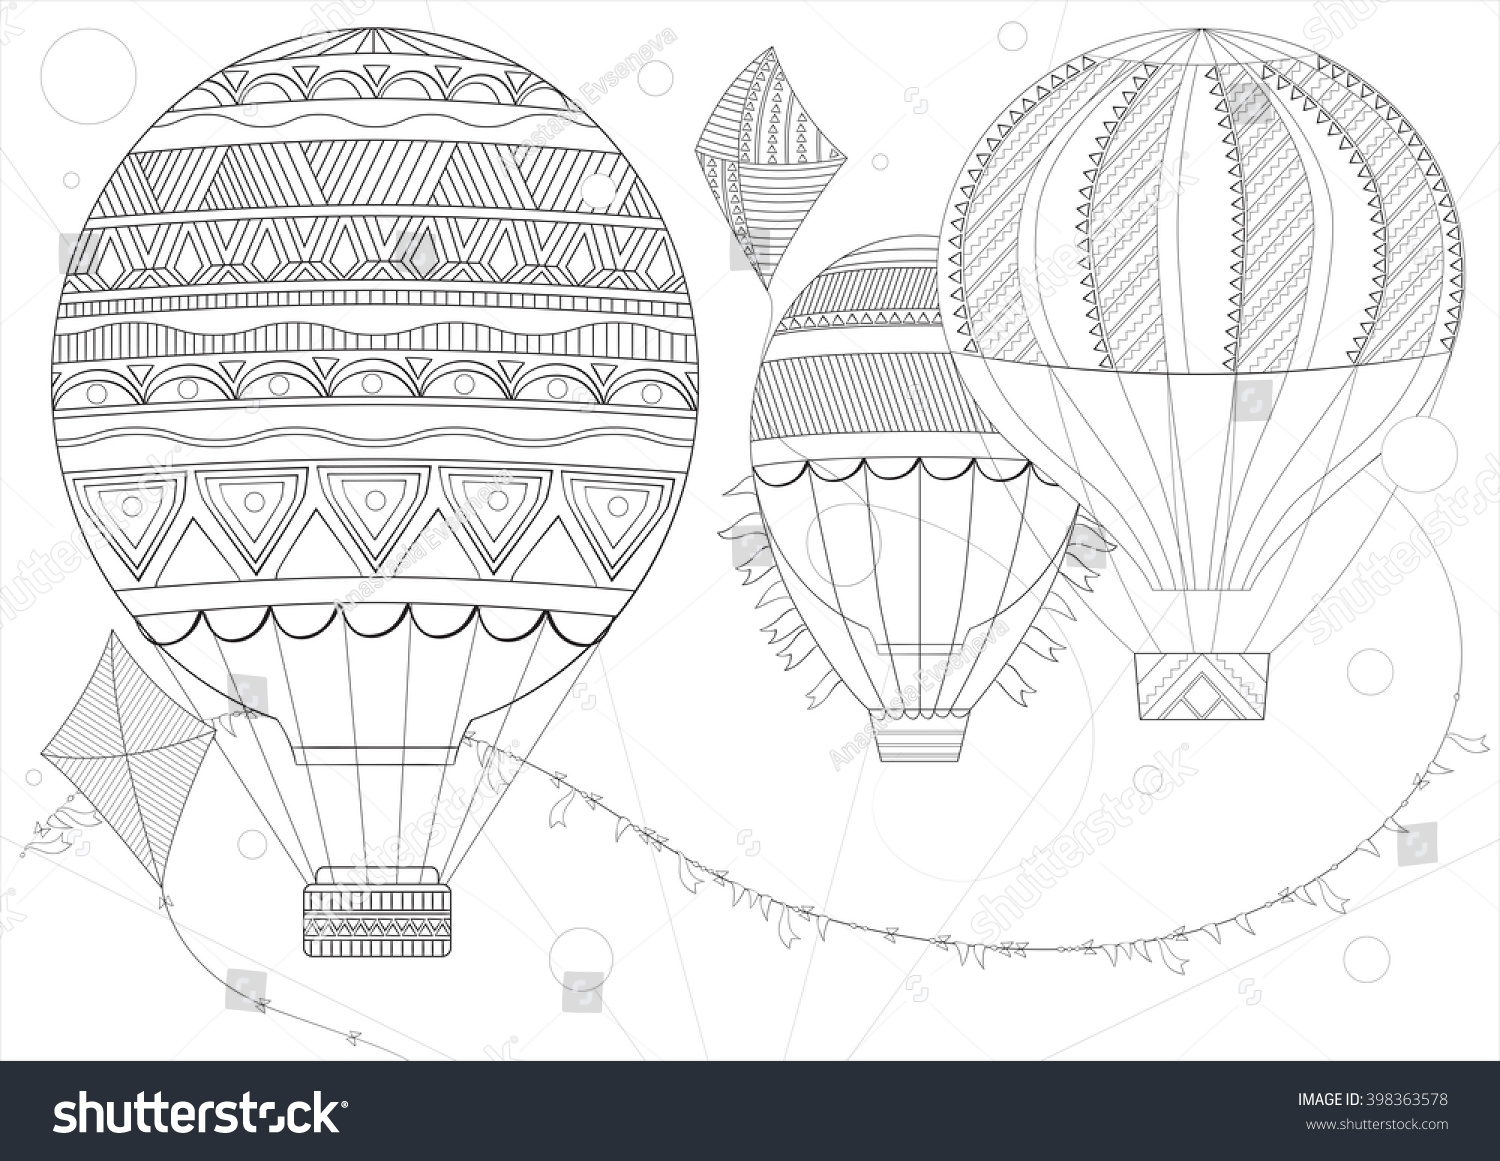 Coloring page adult and children A4 Vector Monochrome Zentangle stylized abstract fantastic Balloon flying ethnic